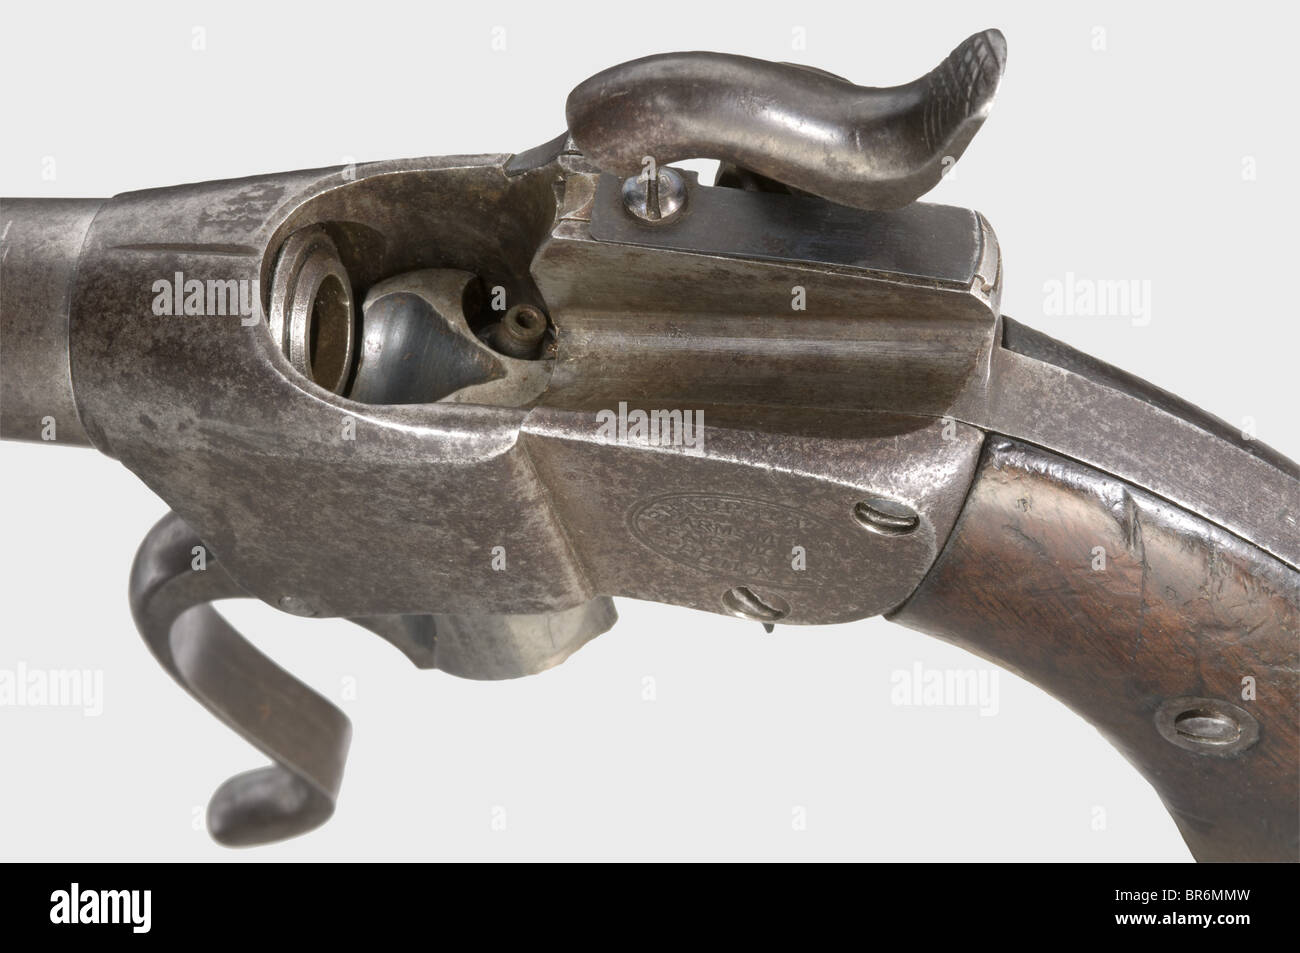 A Sharps pistol, 1st model, .34 cal., no. 104. 5'-barrel with minimally rough bore. Block action with tape primer system. On left frame side marked 'Sharps Patent Arms MFed Fairmount Phila. Pa.'. Walnut grip panels. Metal surfaces in a patina, trigger guard and lock block with remnants of bluing. Grip panels with light usage marks. Length 22.5 cm. Merely 850 Sharps pistols were produced between 1854 and 1857 of both models. historic, historical, 19th century, civil handgun, civil handguns, handheld, gun, guns, firearm, fire arm, firearms, fire arms, weapons, ar, Stock Photo